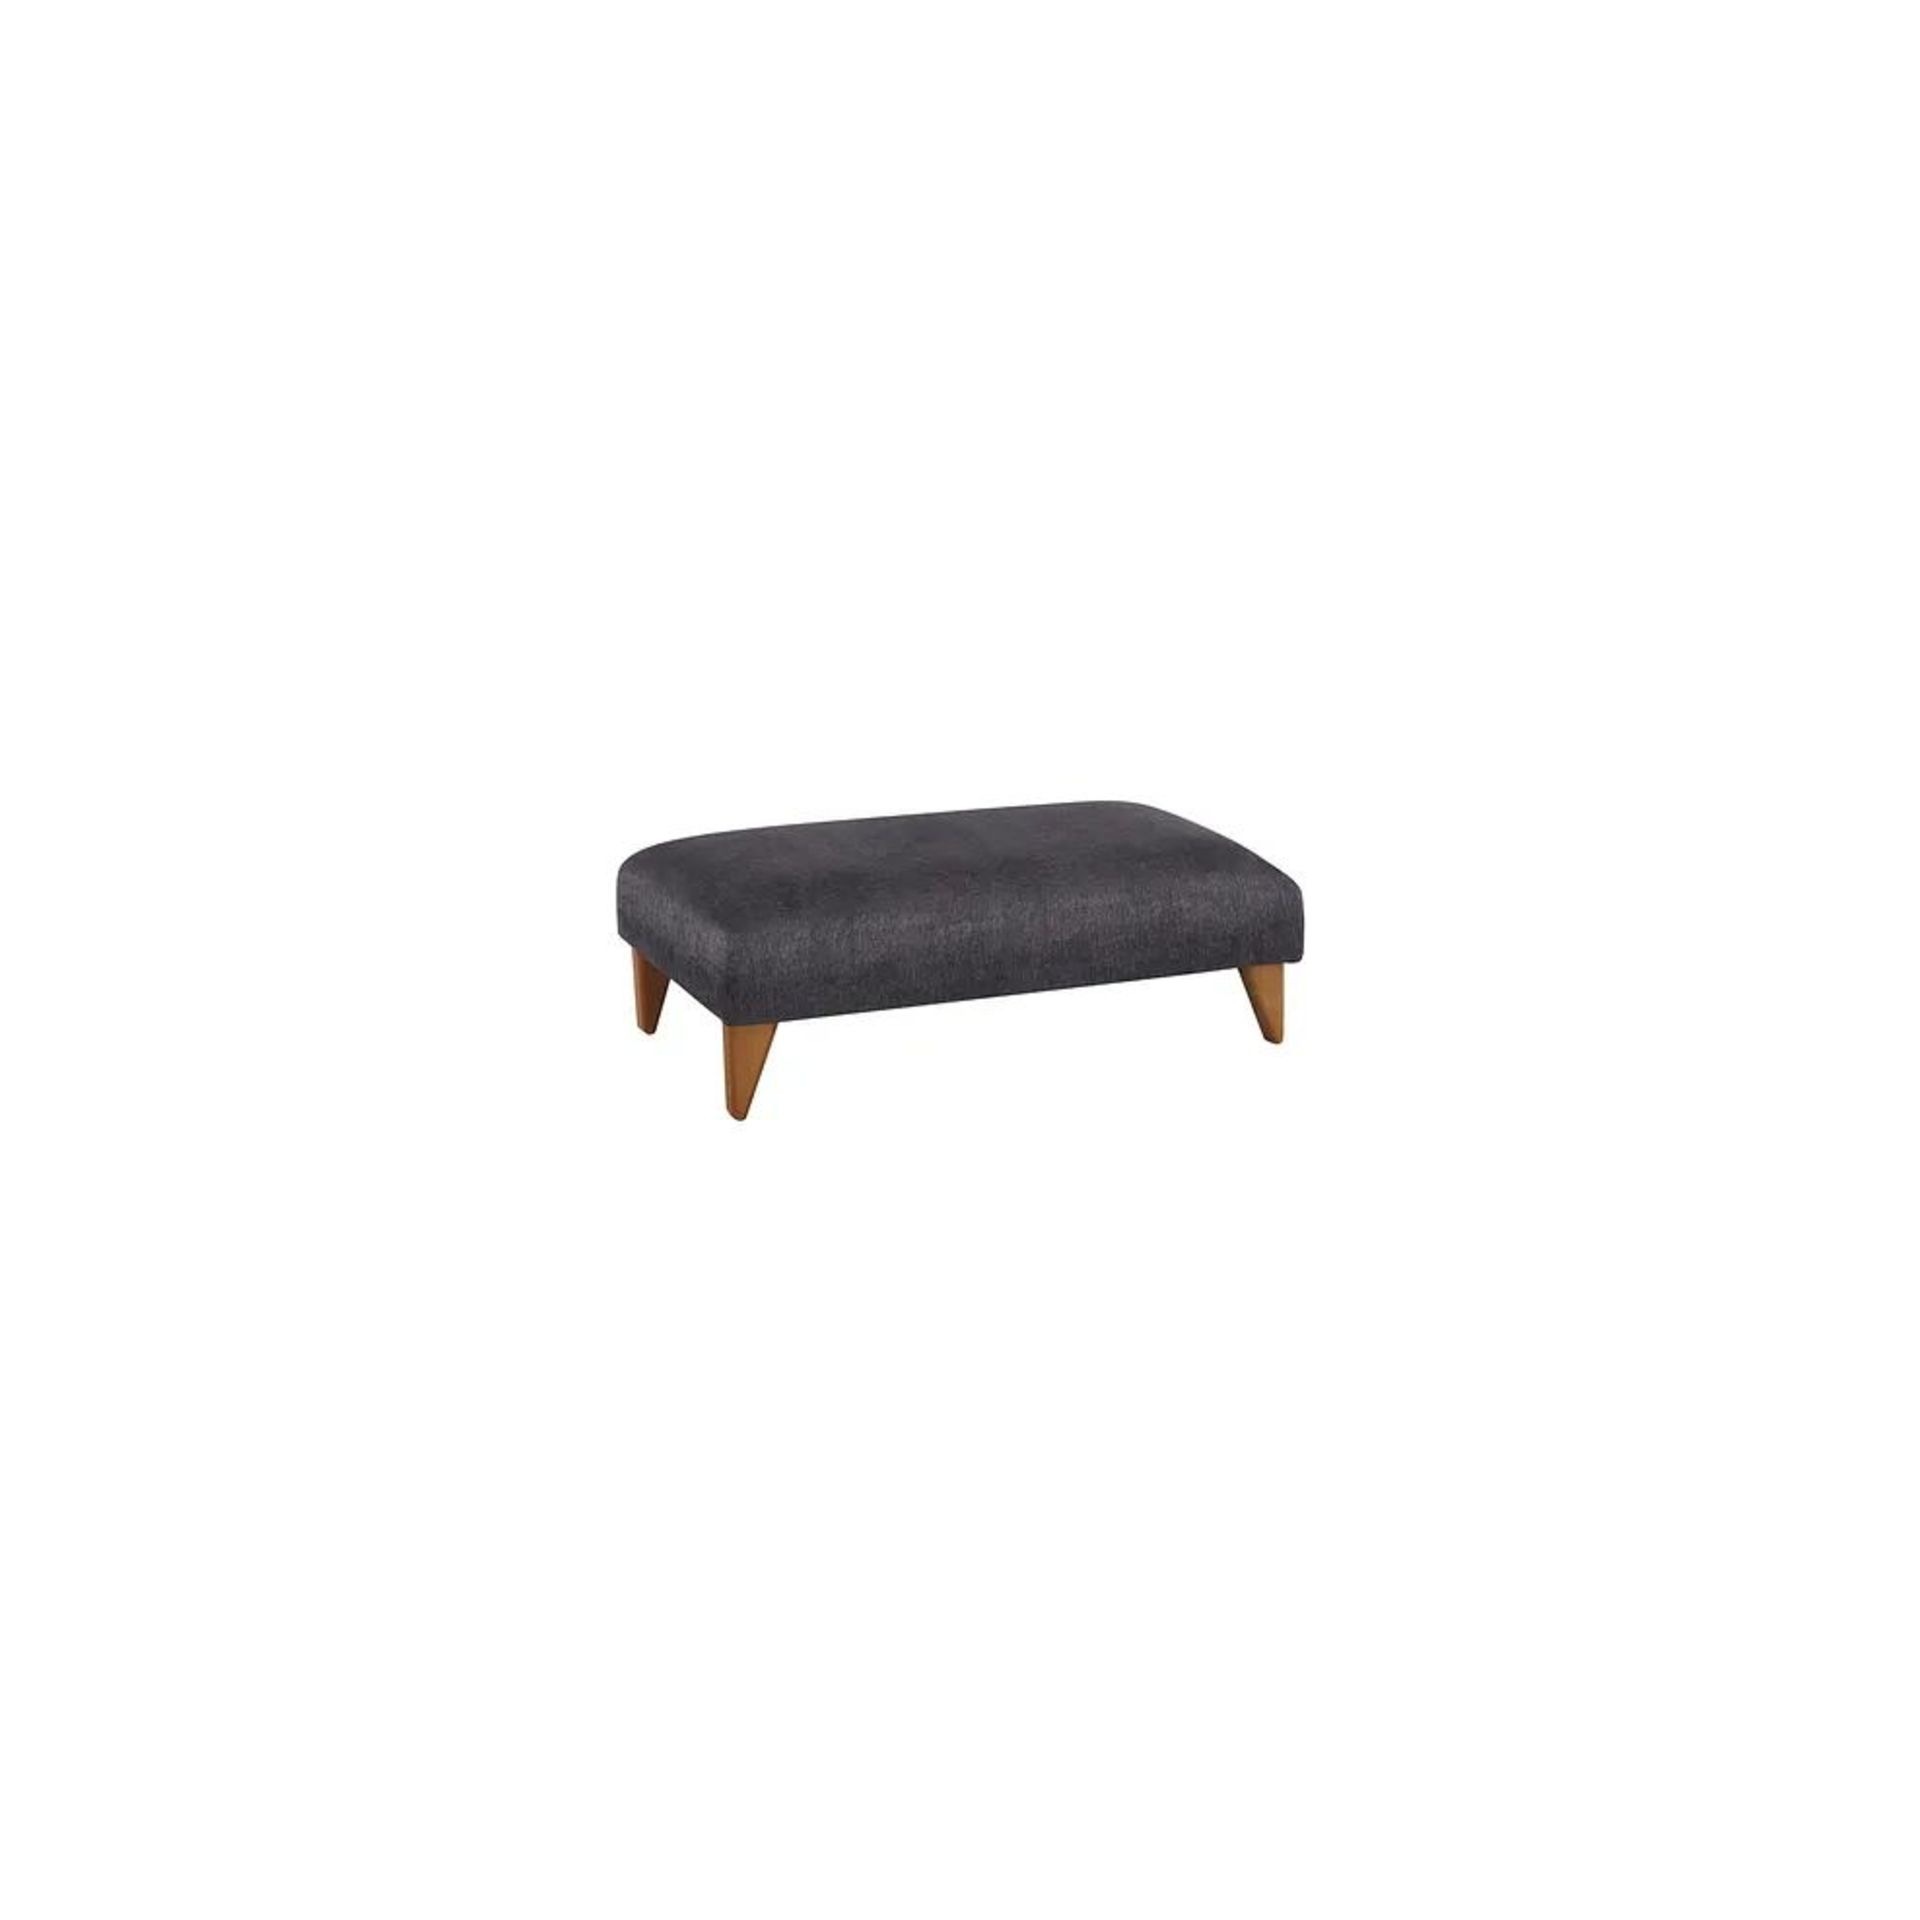 BRAND NEW JASMINE Footstool - ORKNEY GRAPHITE FABRIC. RRP £349. Built with a sturdy hardwood frame